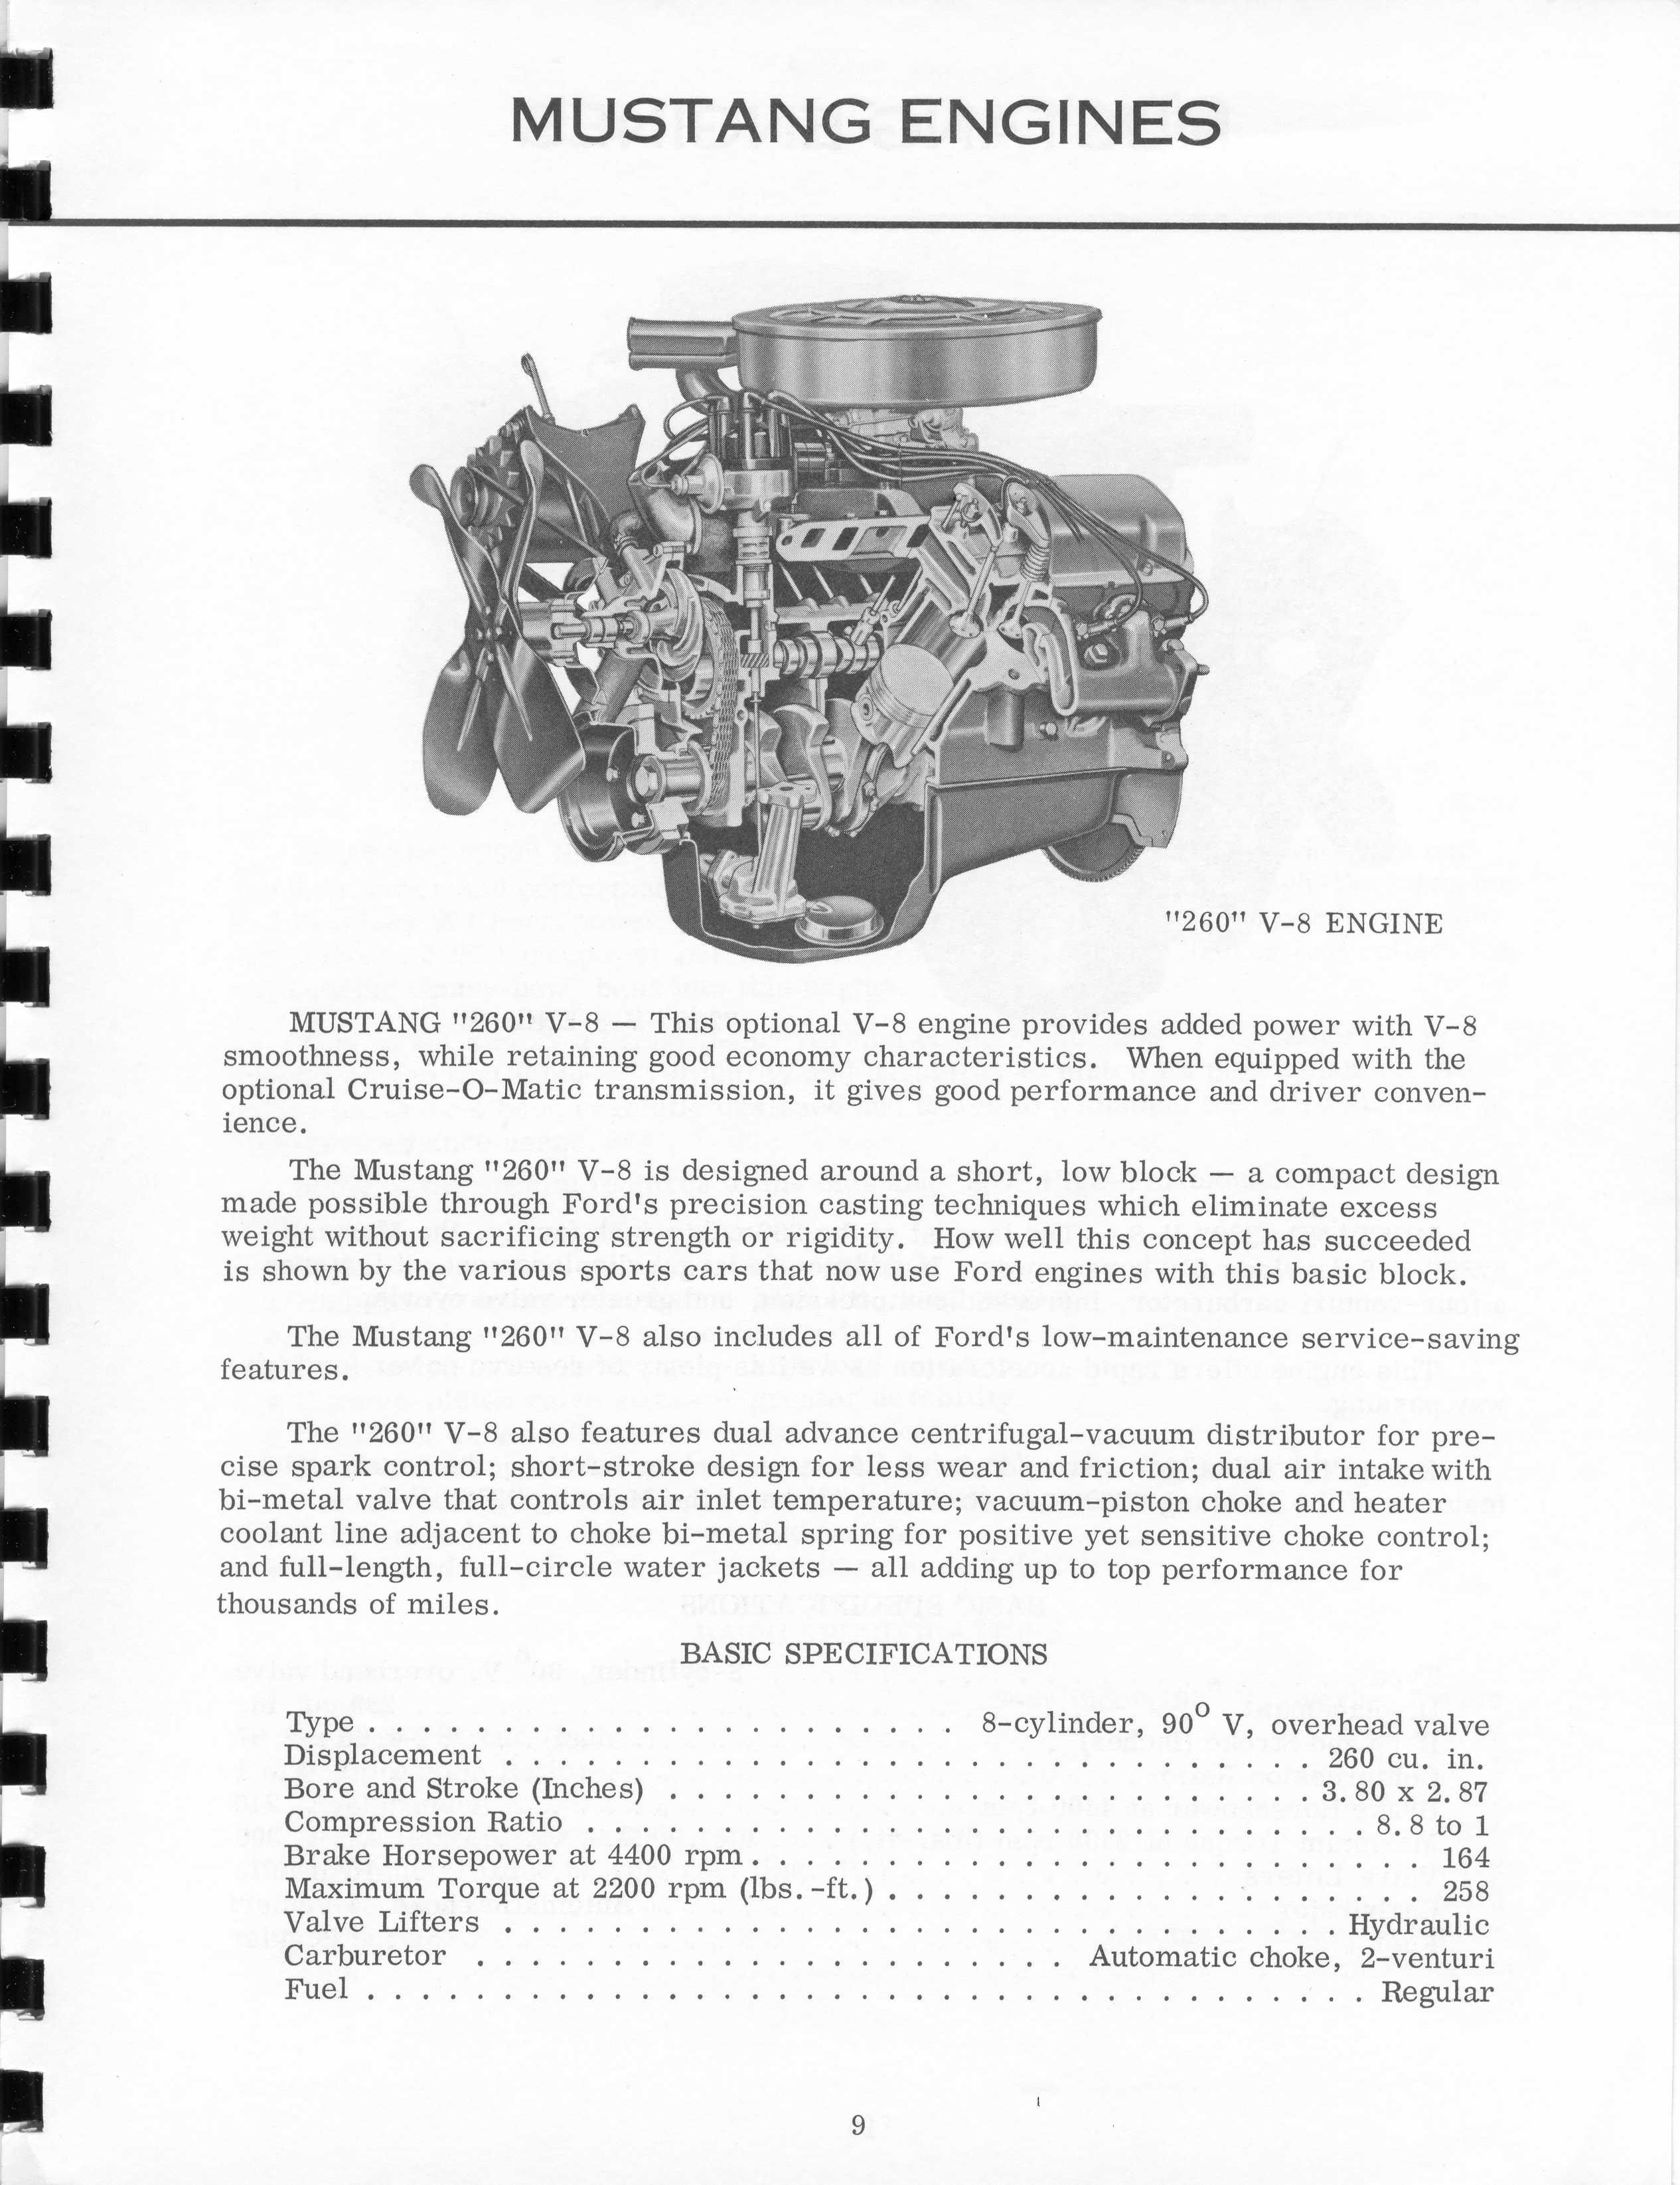 1964_Ford_Mustang_Press_Packet-09